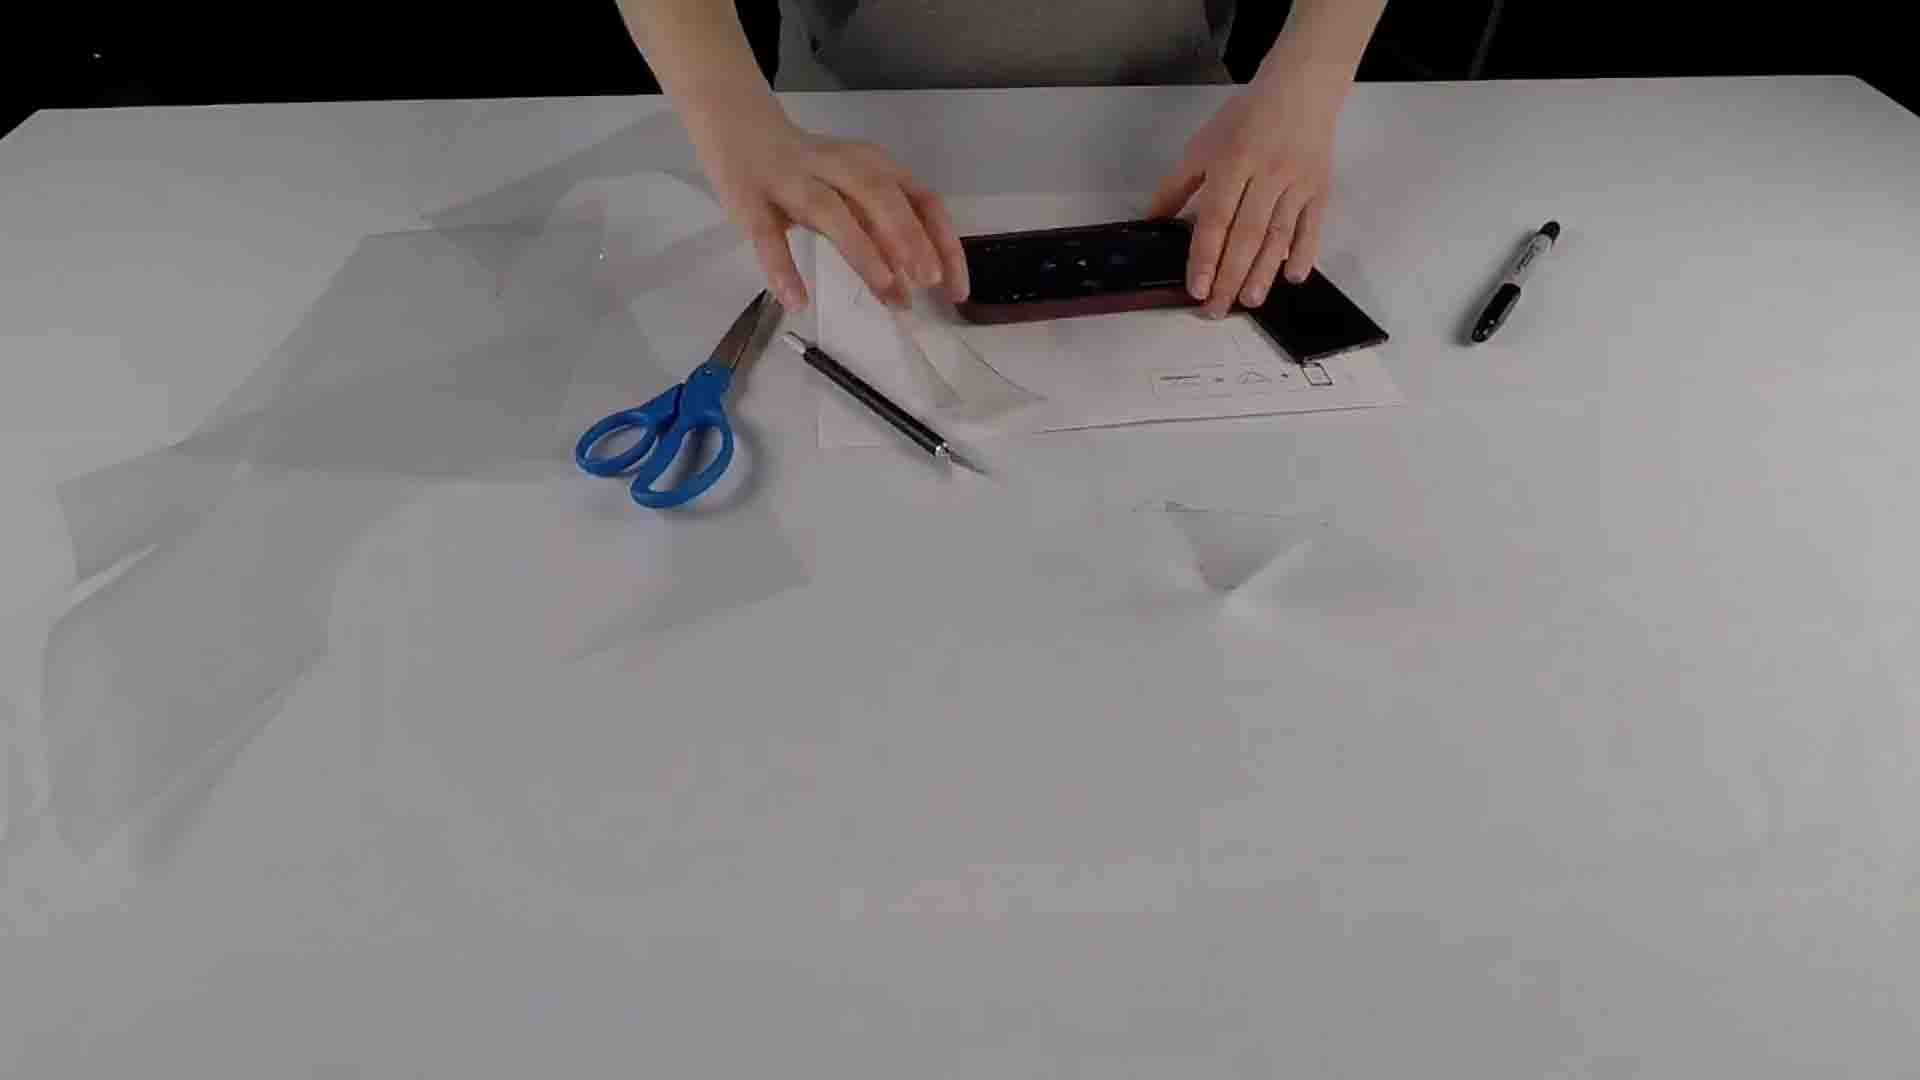 Scissors, smart phone on a table used to create a hologram